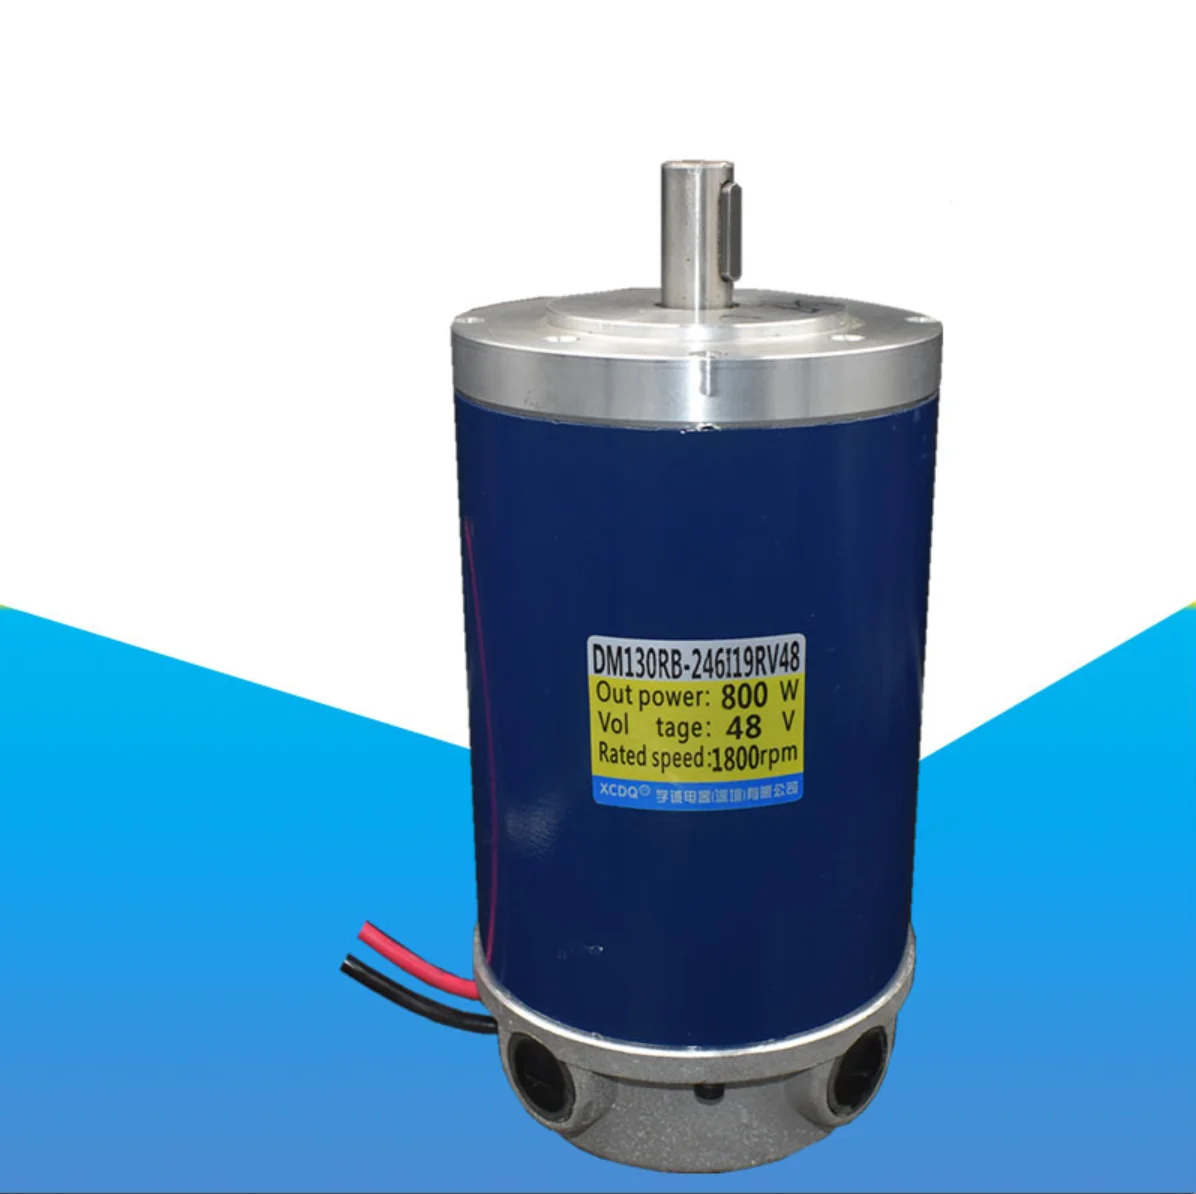 750w 800w 12v 24v 48v 1800rpm Dc Optical Axis High-speed Motor, Forward And  Reverse, Adjustable Speed, High Torque Dc Motor AliExpress